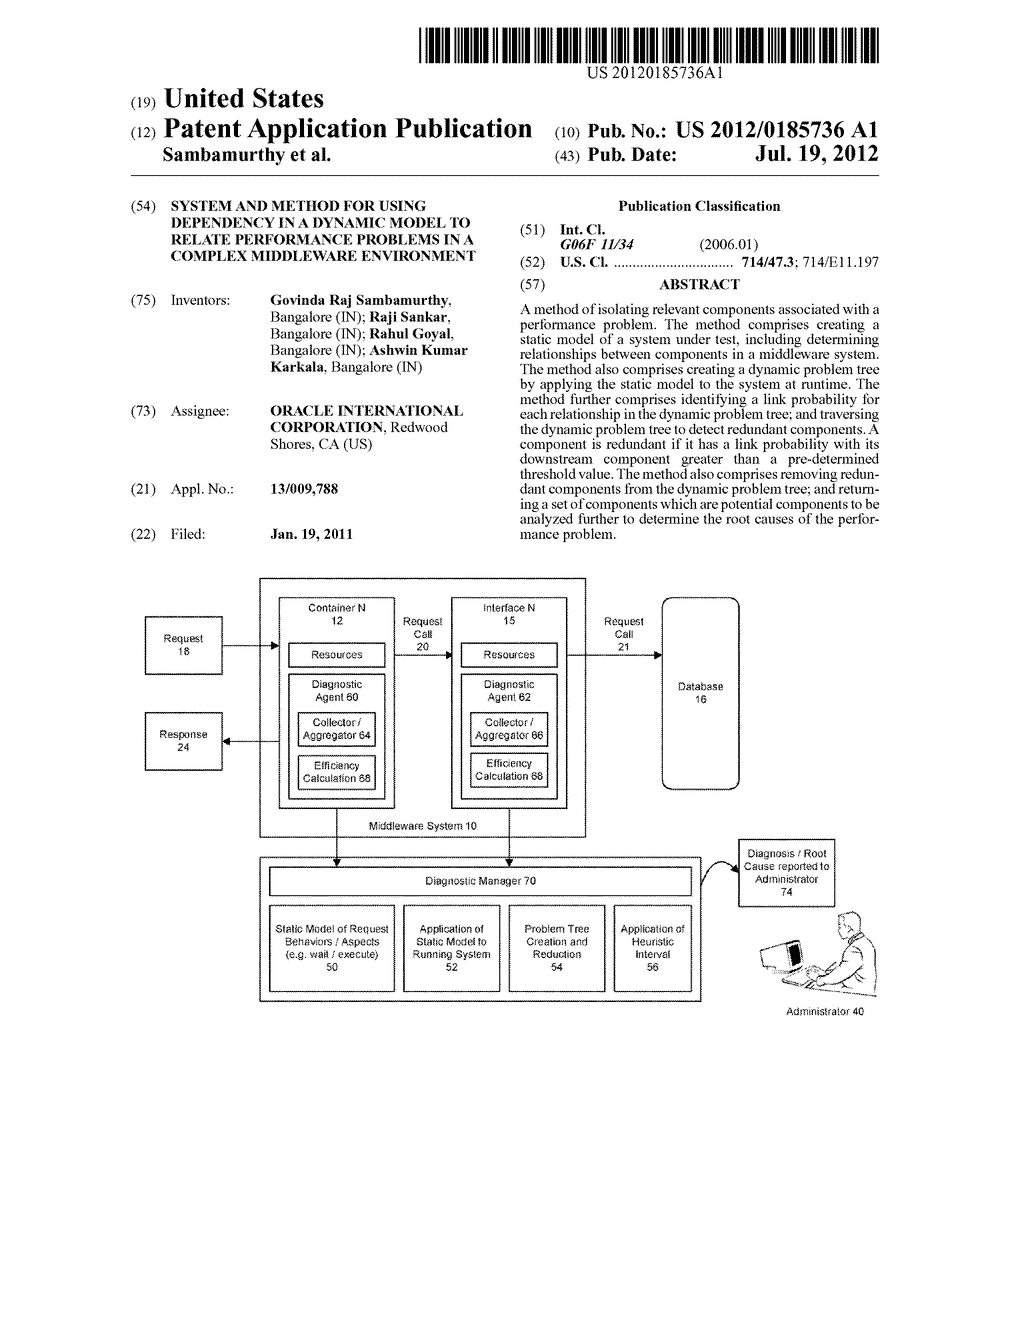 SYSTEM AND METHOD FOR USING DEPENDENCY IN A DYNAMIC MODEL TO RELATE     PERFORMANCE PROBLEMS IN A COMPLEX MIDDLEWARE ENVIRONMENT - diagram, schematic, and image 01